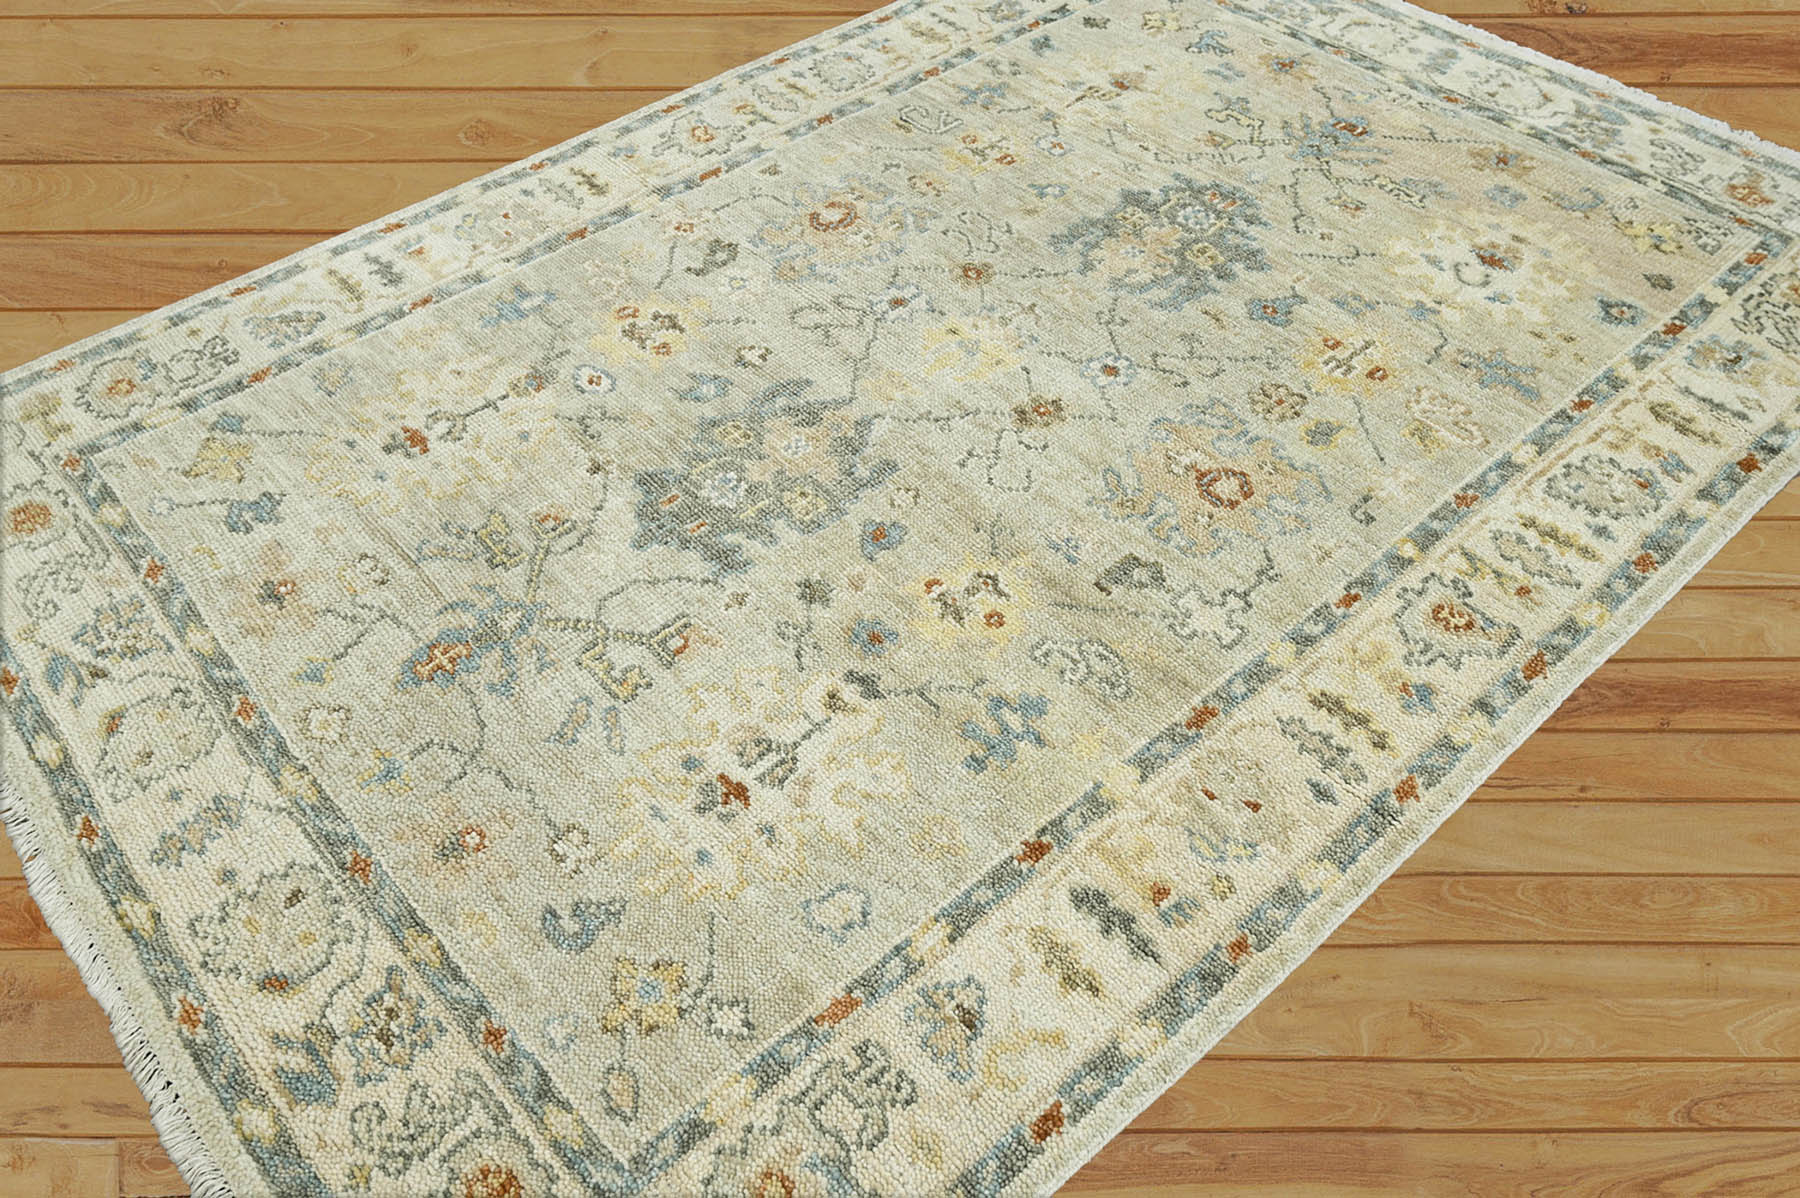 Naszir 6x9 Hand Knotted 100% Wool Oushak Traditional Oriental Area Rug Light Gray, Beige Color